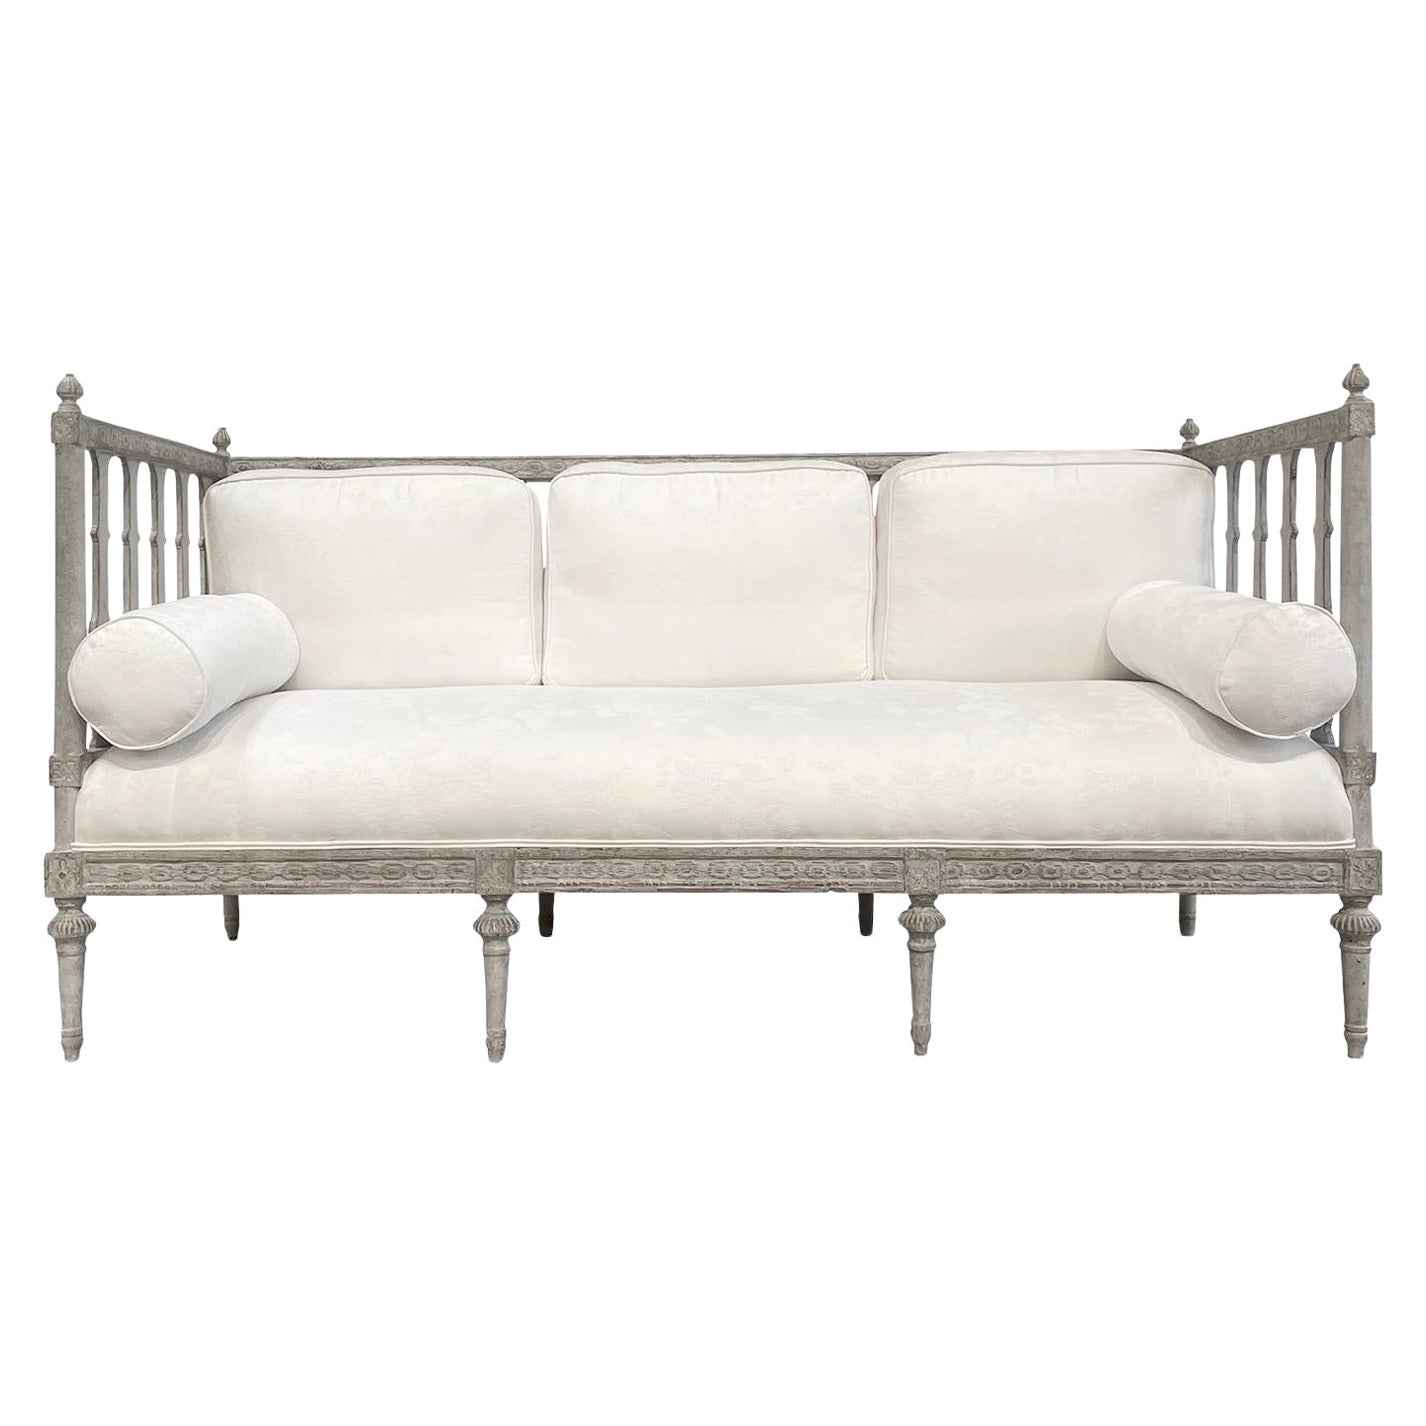 18th Century White-Grey Swedish Gustavian Pinewood Sofa Bench, Antique Daybed For Sale